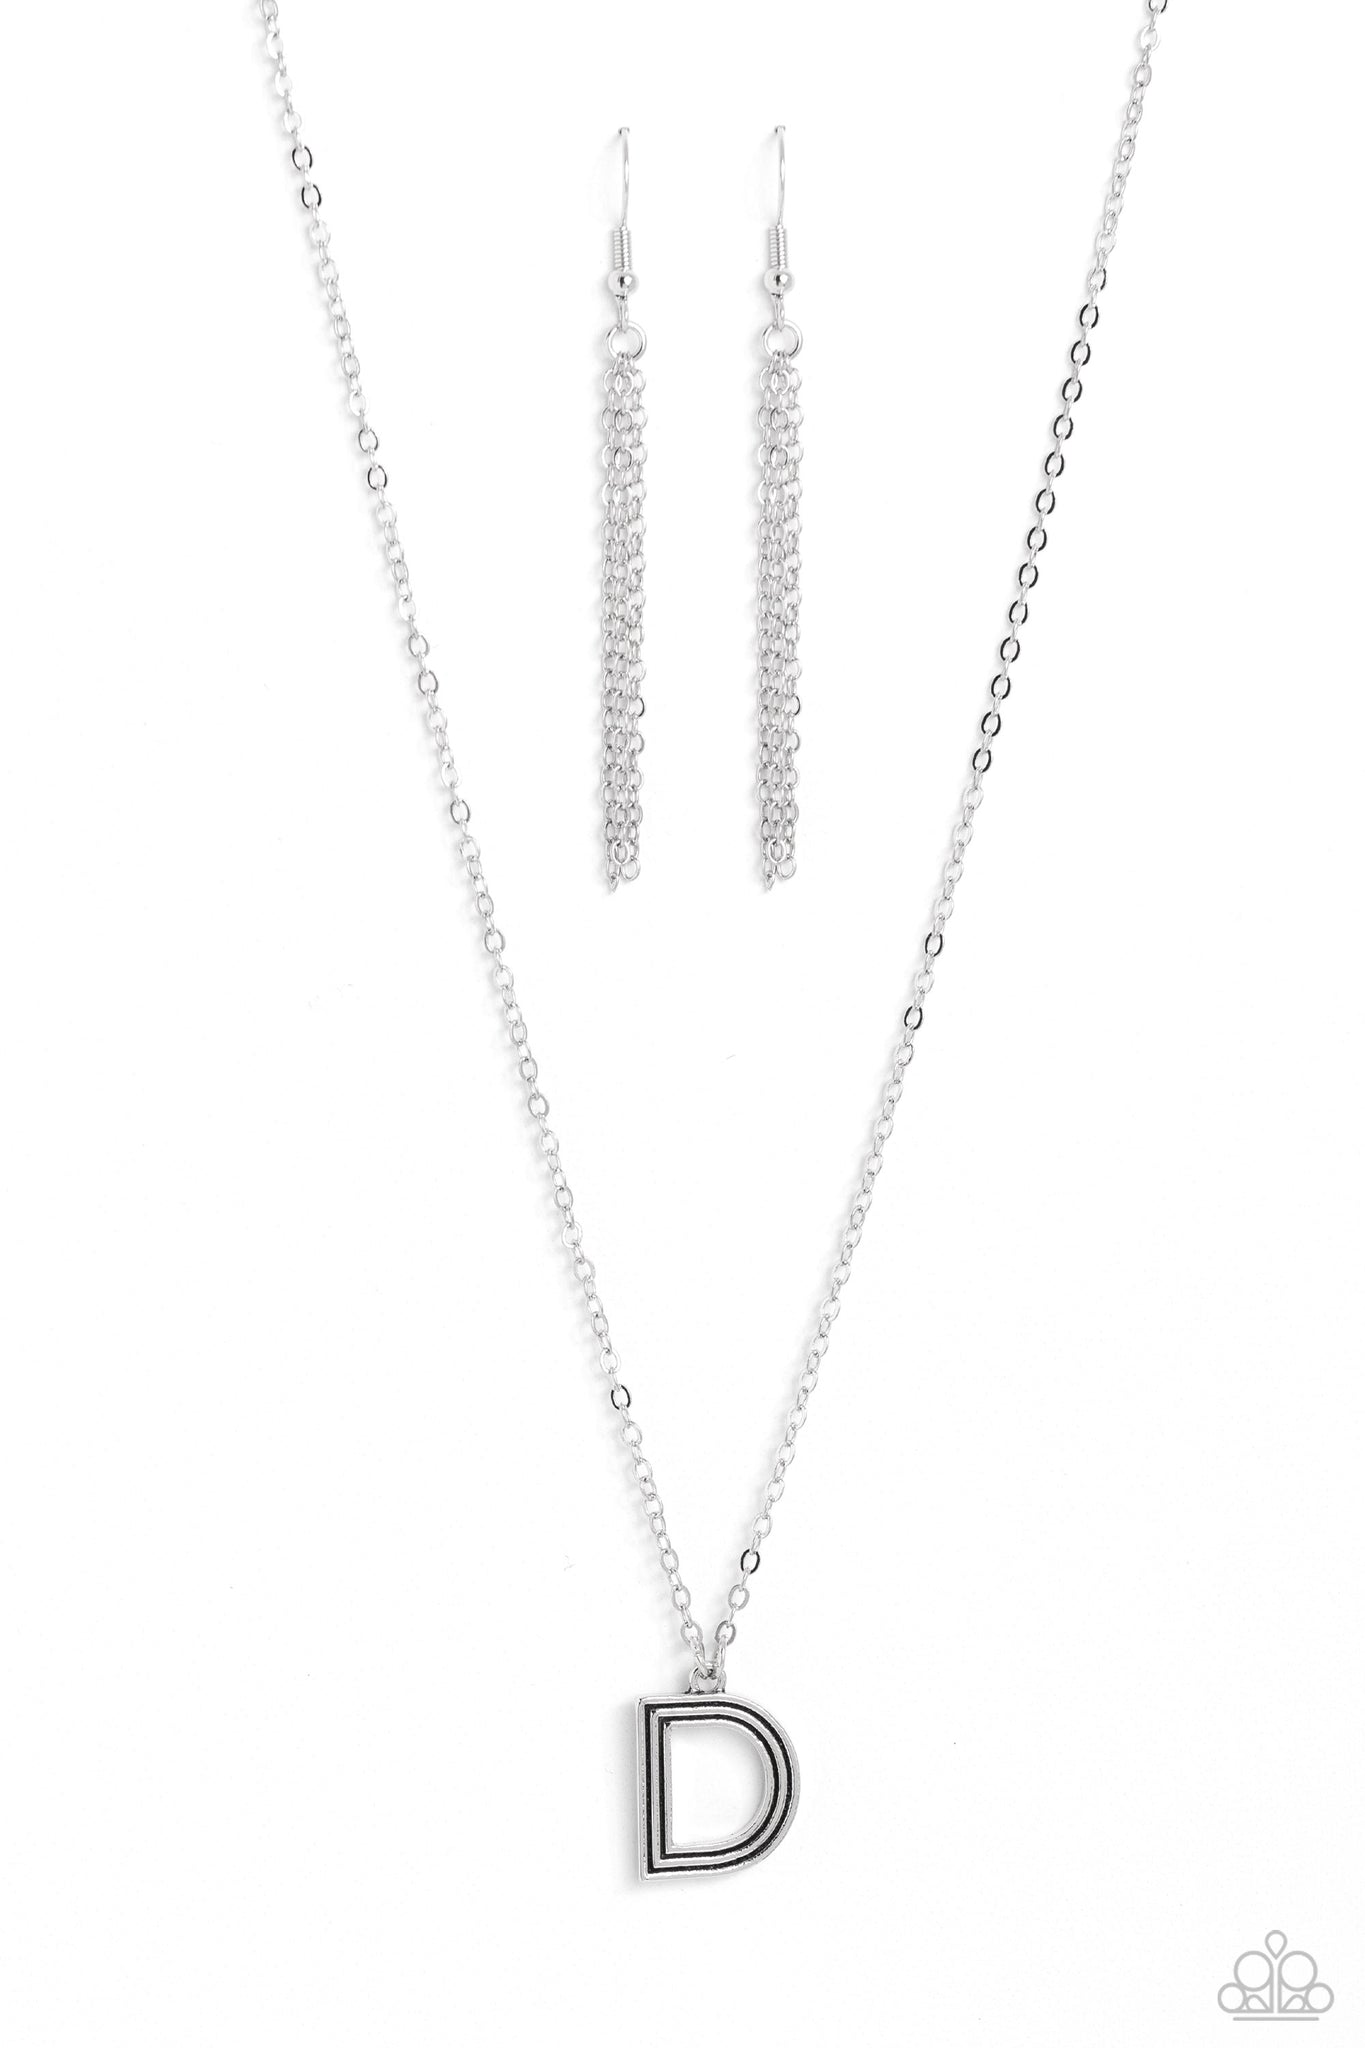 Paparazzi - Leave Your Initials - Silver - D Necklace